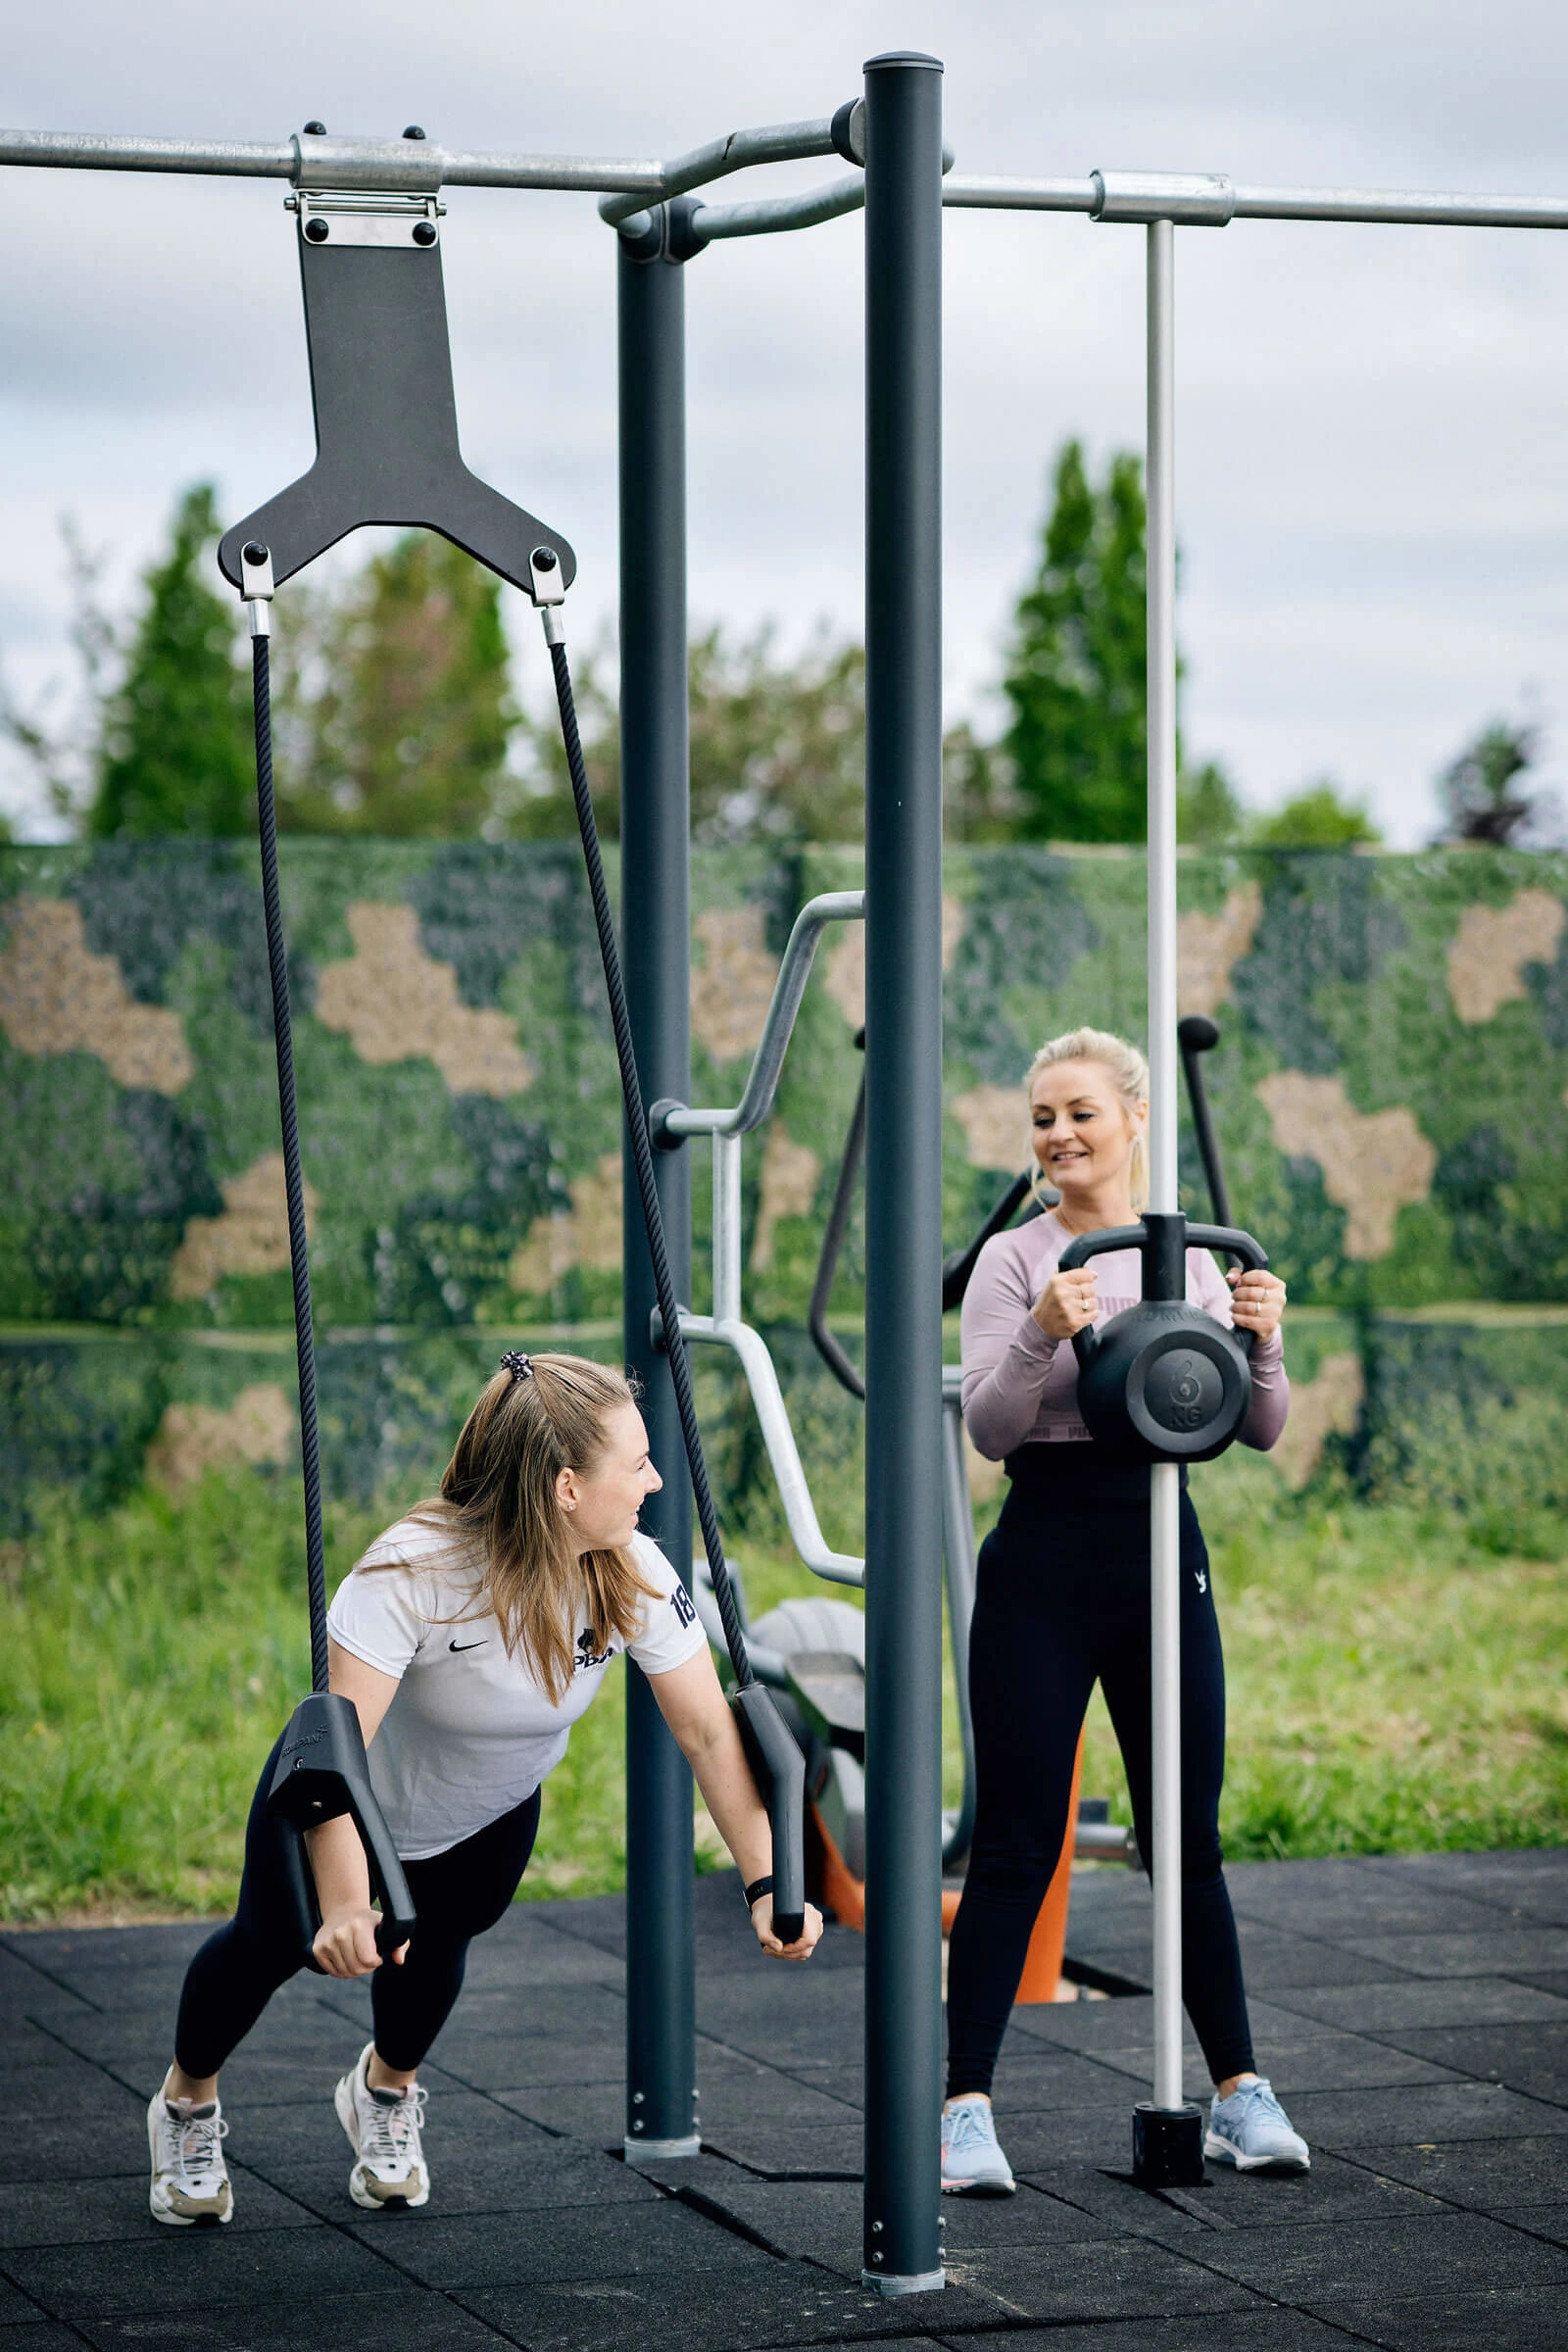 Women working out on compact function training system a more affordable option